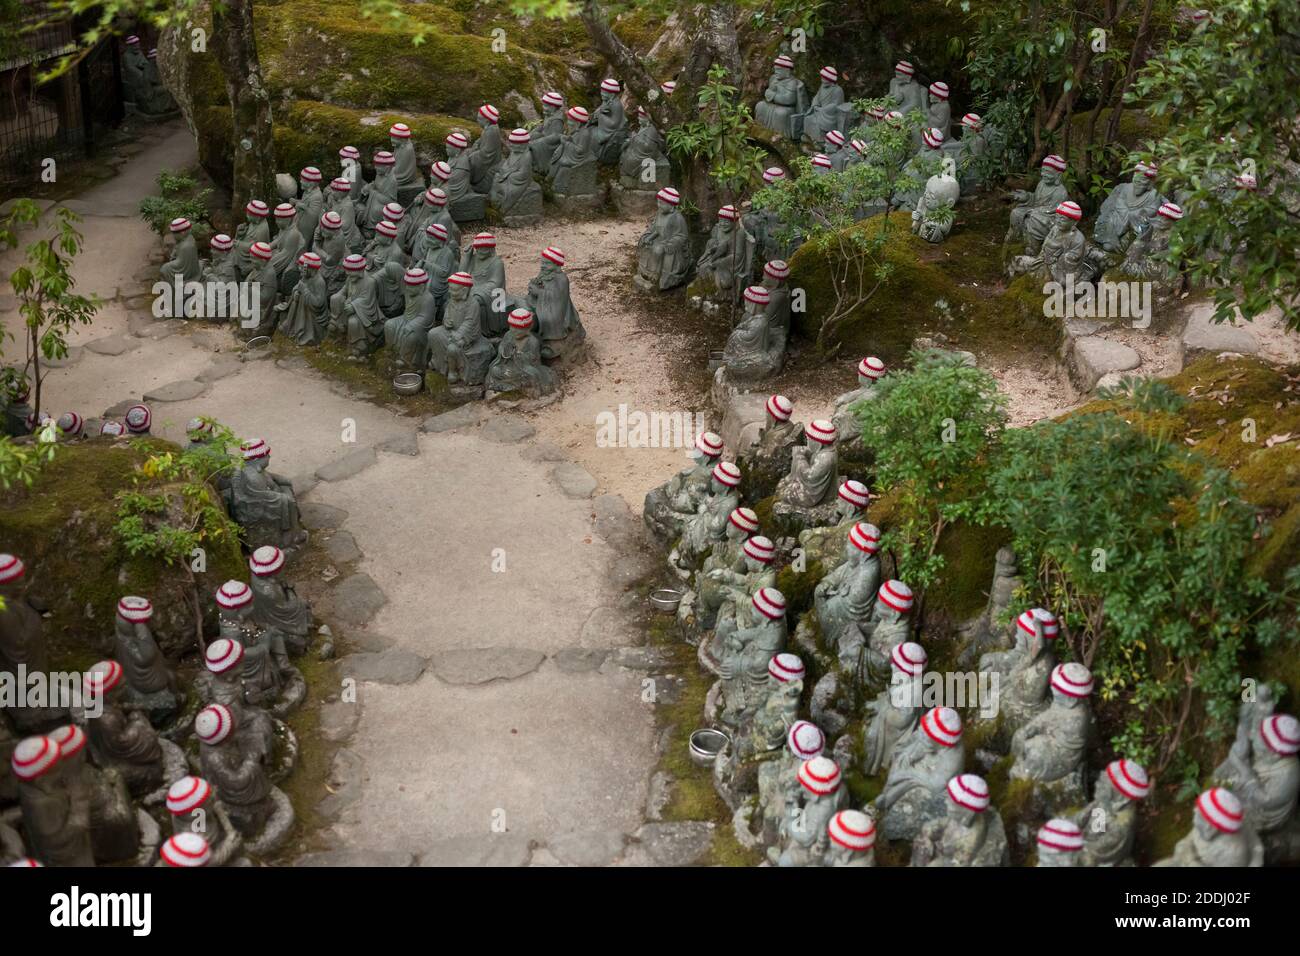 https://c8.alamy.com/comp/2DDJ02F/high-angle-view-of-hundreds-of-rakan-statuettes-with-woolen-bonnets-lined-up-by-the-stone-pathway-to-daisho-in-buddhist-temple-mt-misen-miyajima-2DDJ02F.jpg